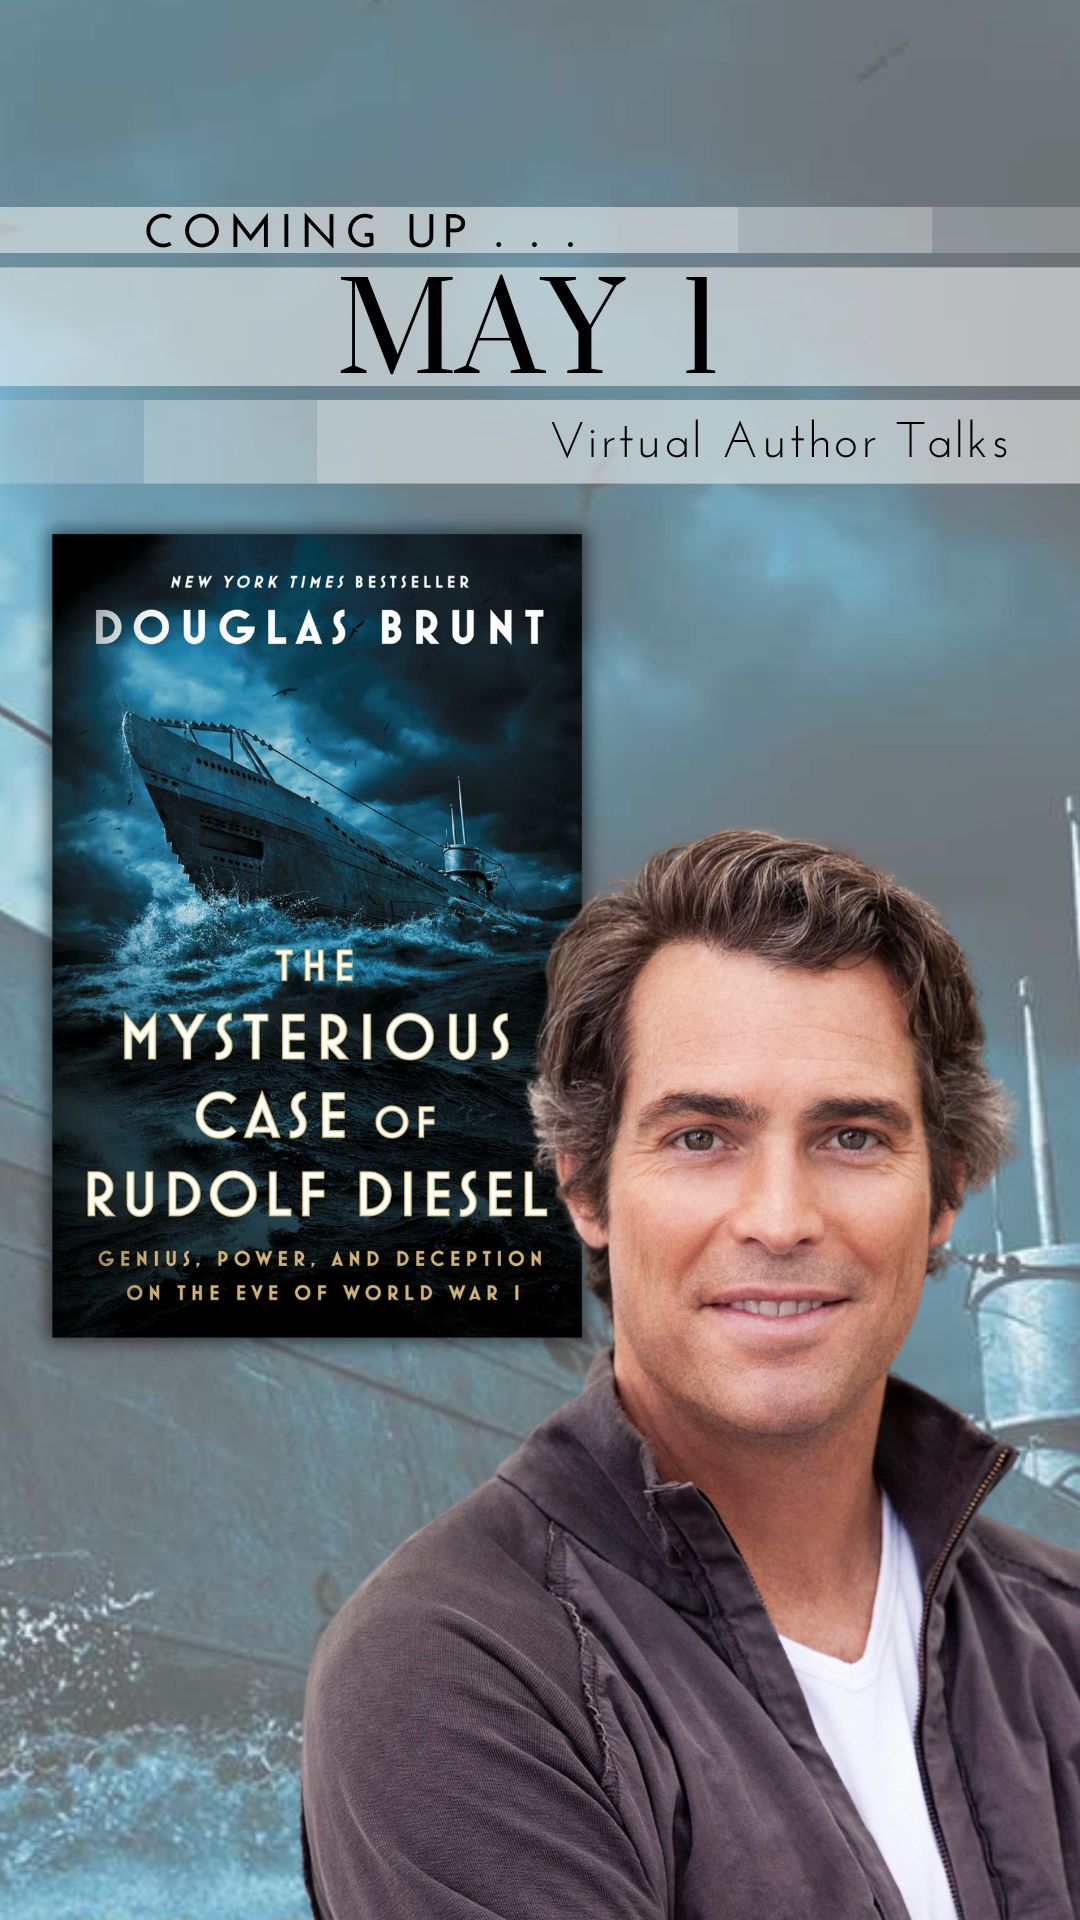 Virtual Author Talk May 1, 2024. Image of cover of The Mysterious Case of Rudolf Diesel by Douglas Brunt and an image of the author